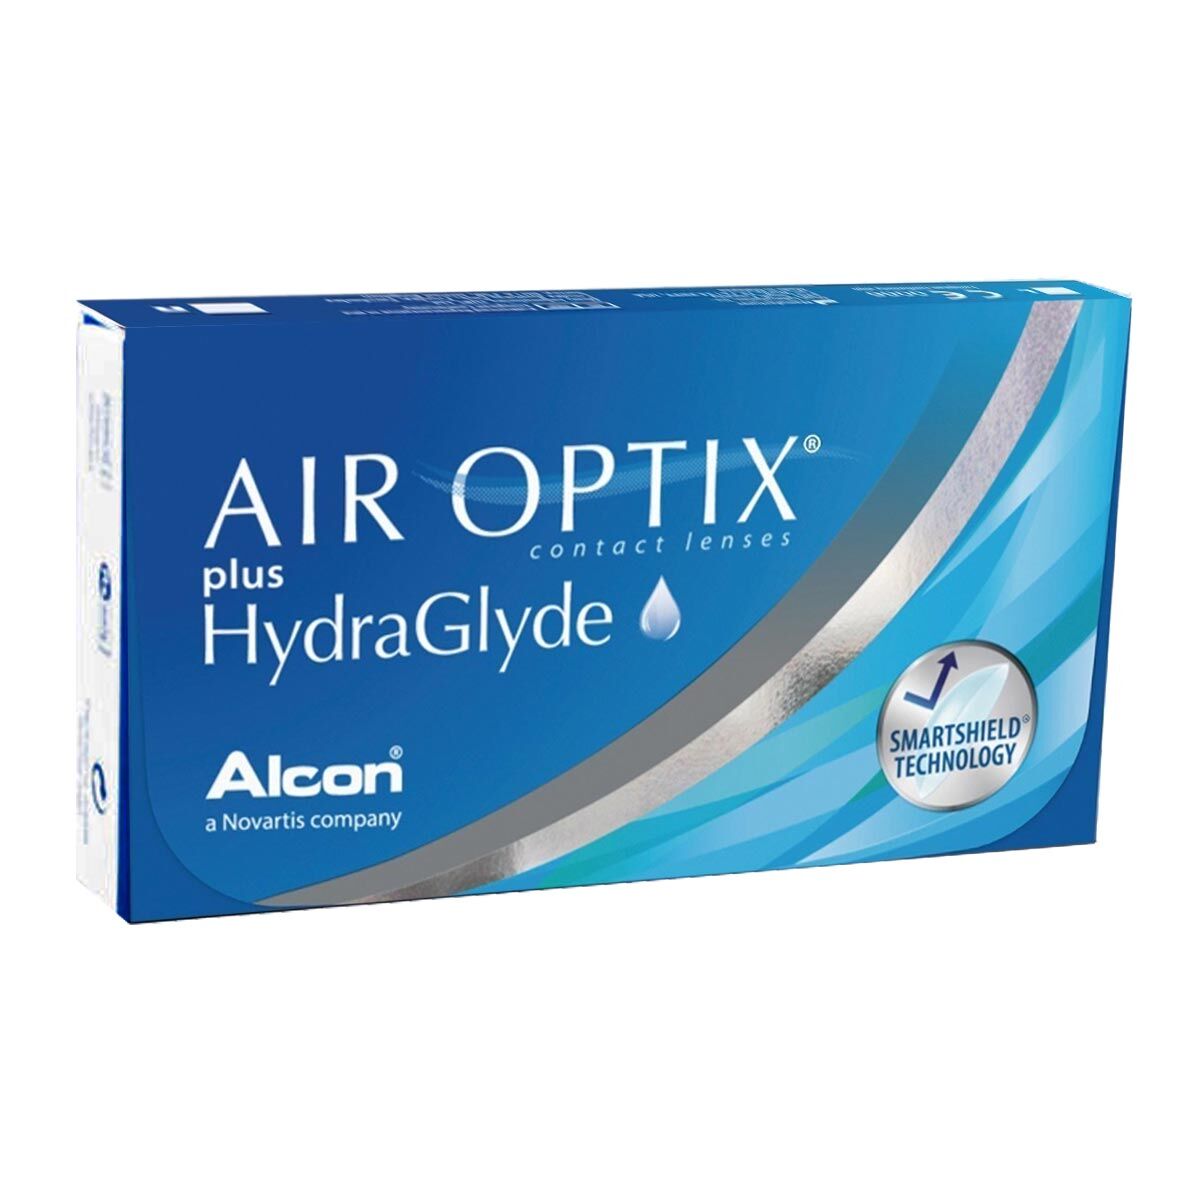 Alcon Air Optix plus HydraGlyde (3 Contact Lenses), Monthly Disposable Lenses by Alcon